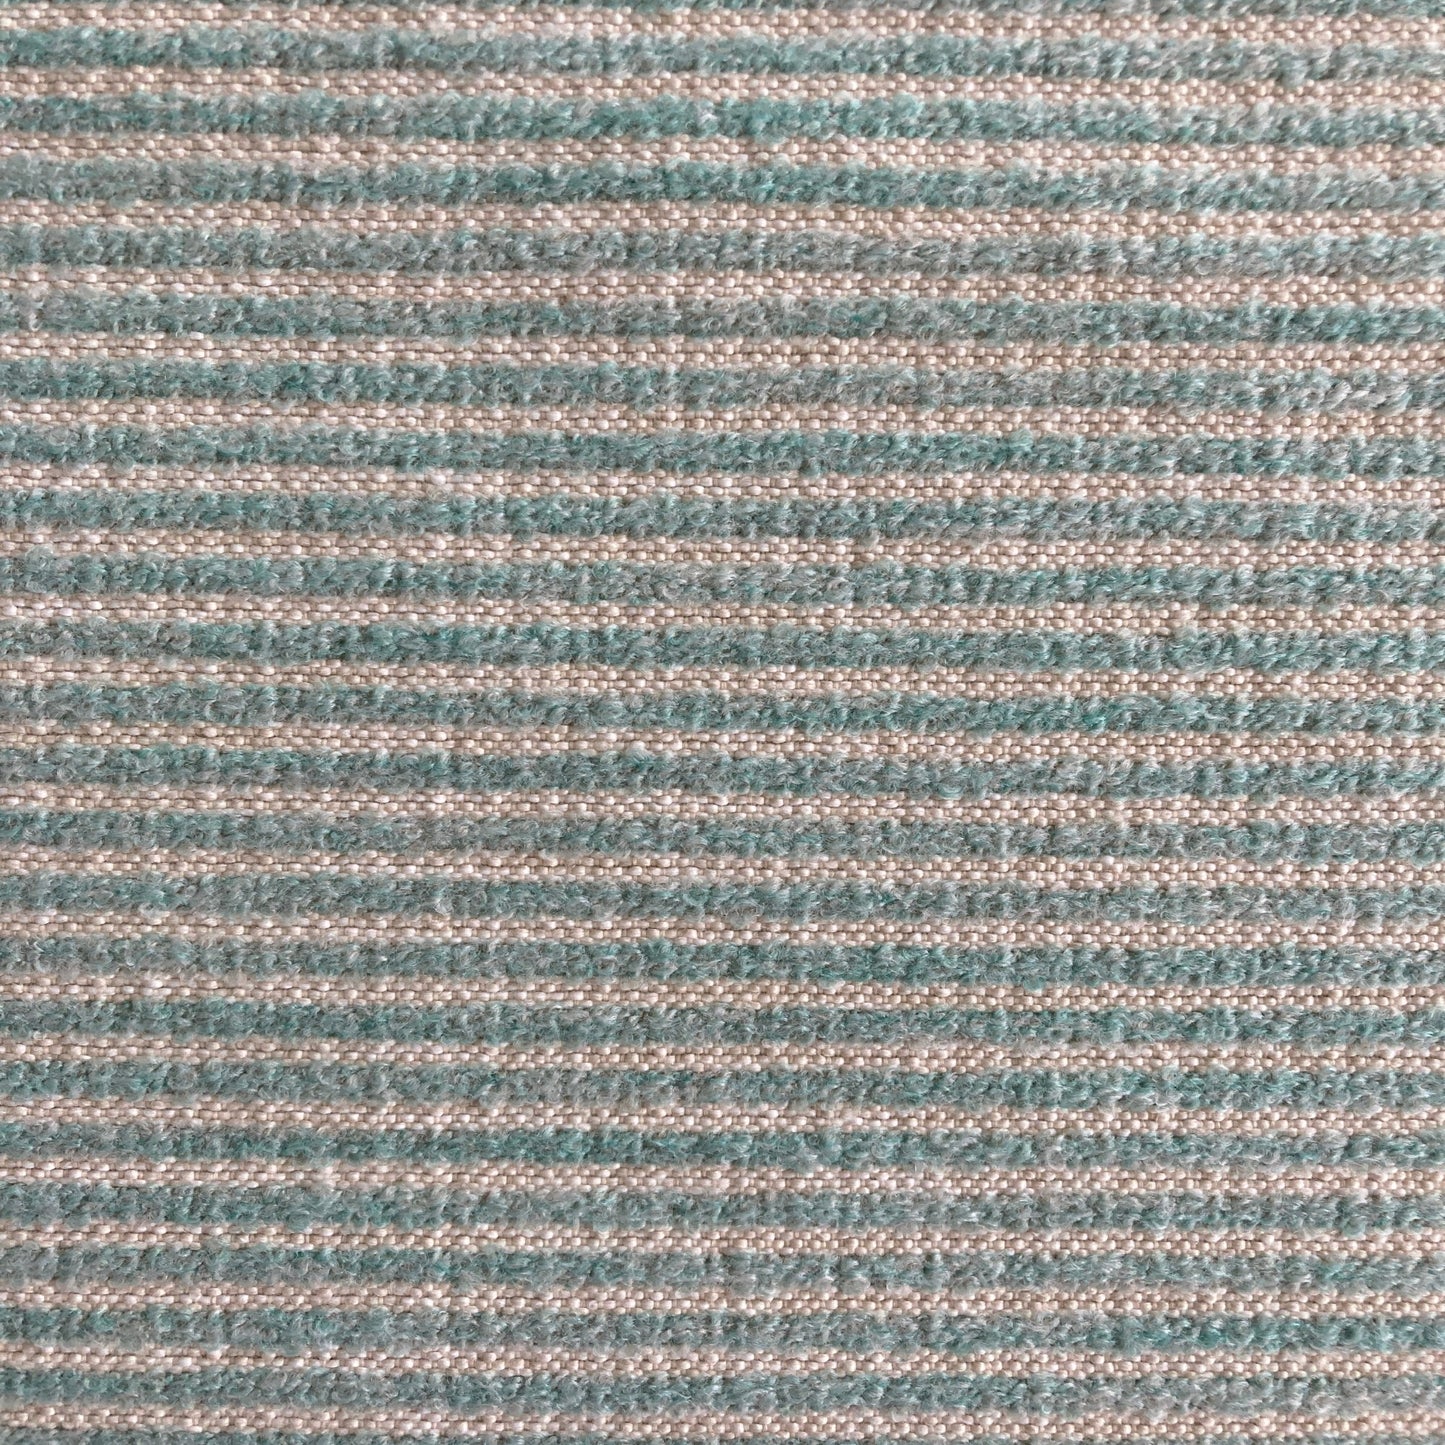 #377 BEIGE AND TURQUOISE STRIPE